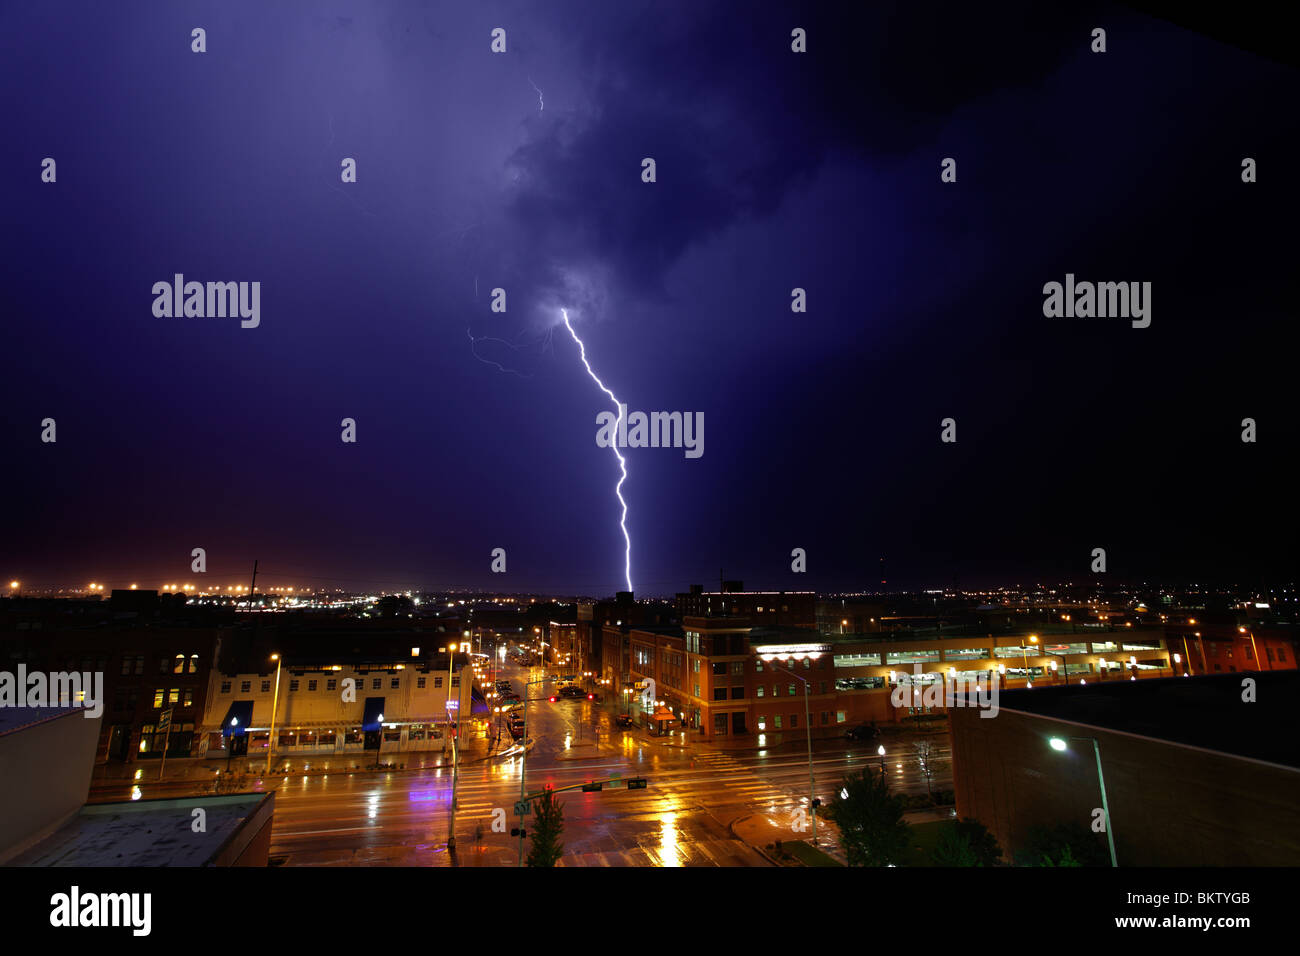 Blue lightning striking over a downtown area. Stock Photo